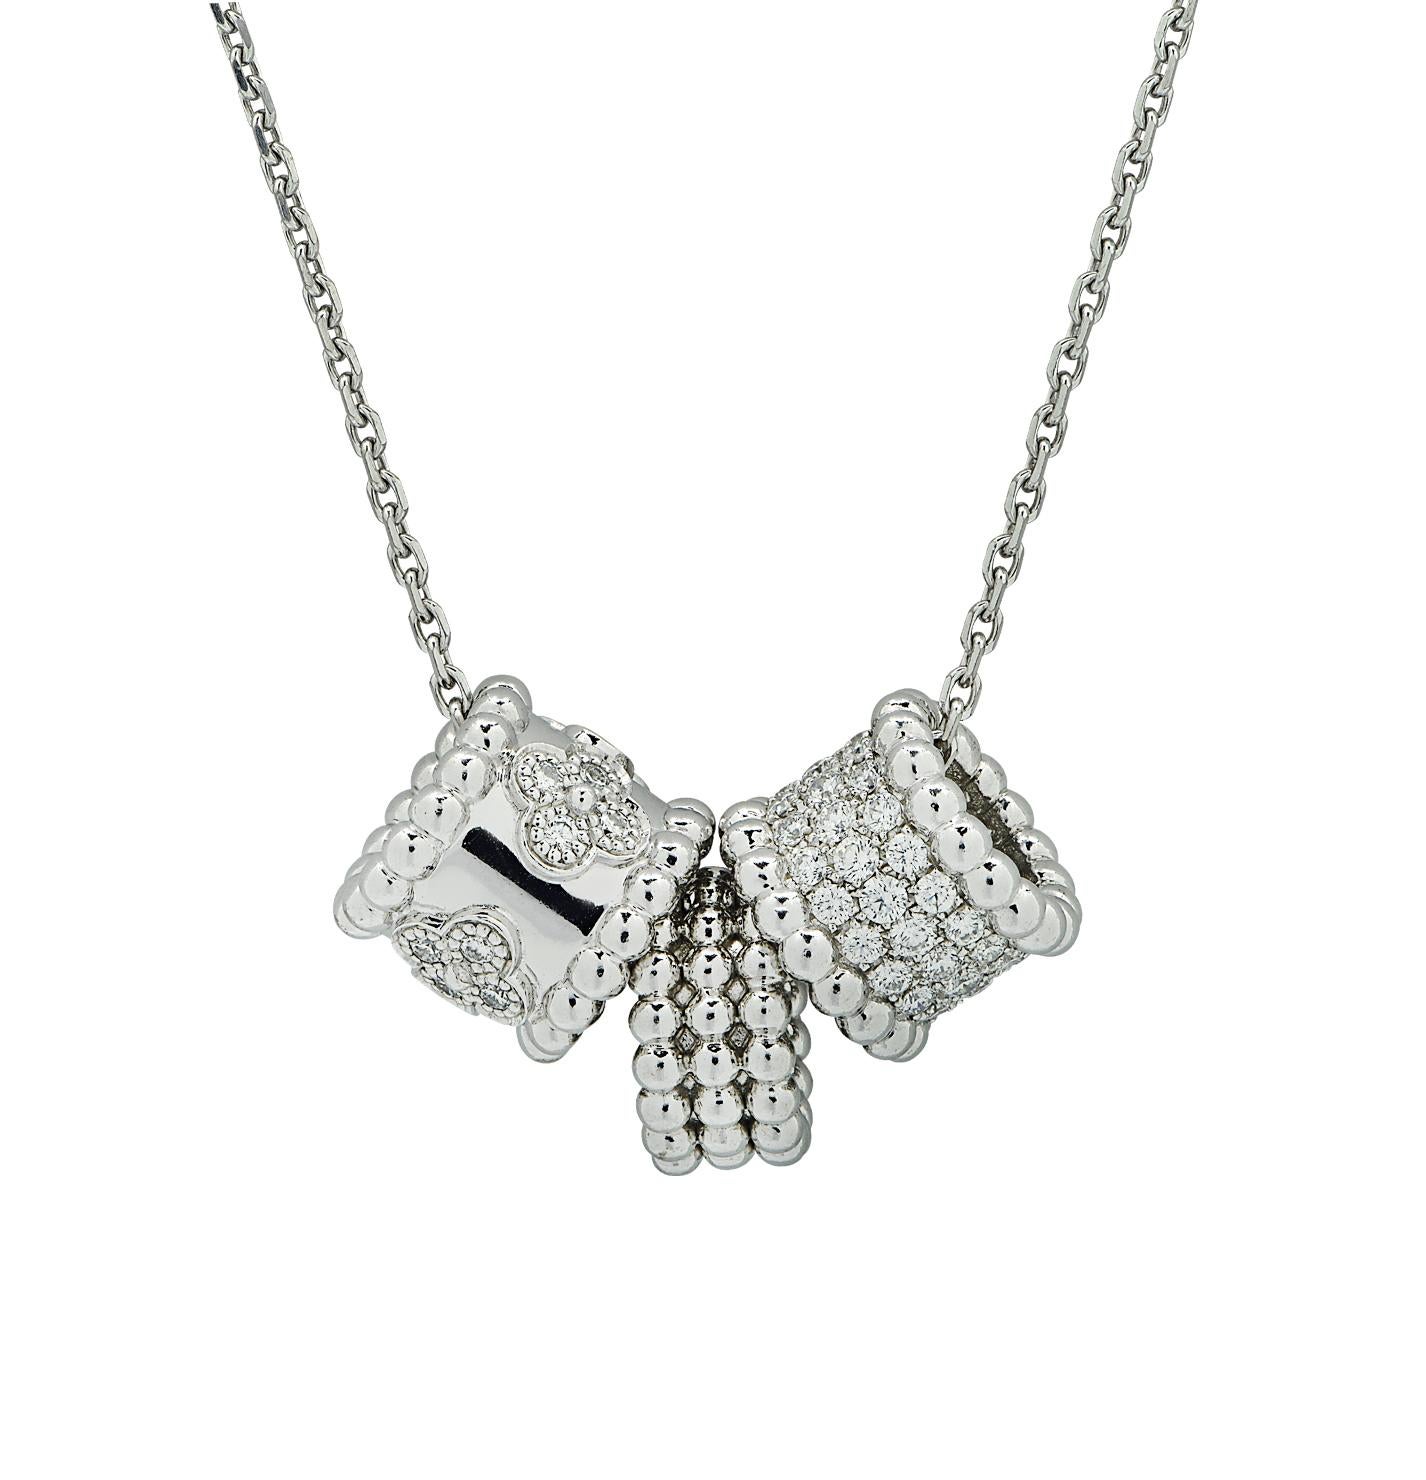 Modern Van Cleef & Arpels White Gold Trace Chain Necklace and Perlée Pendants